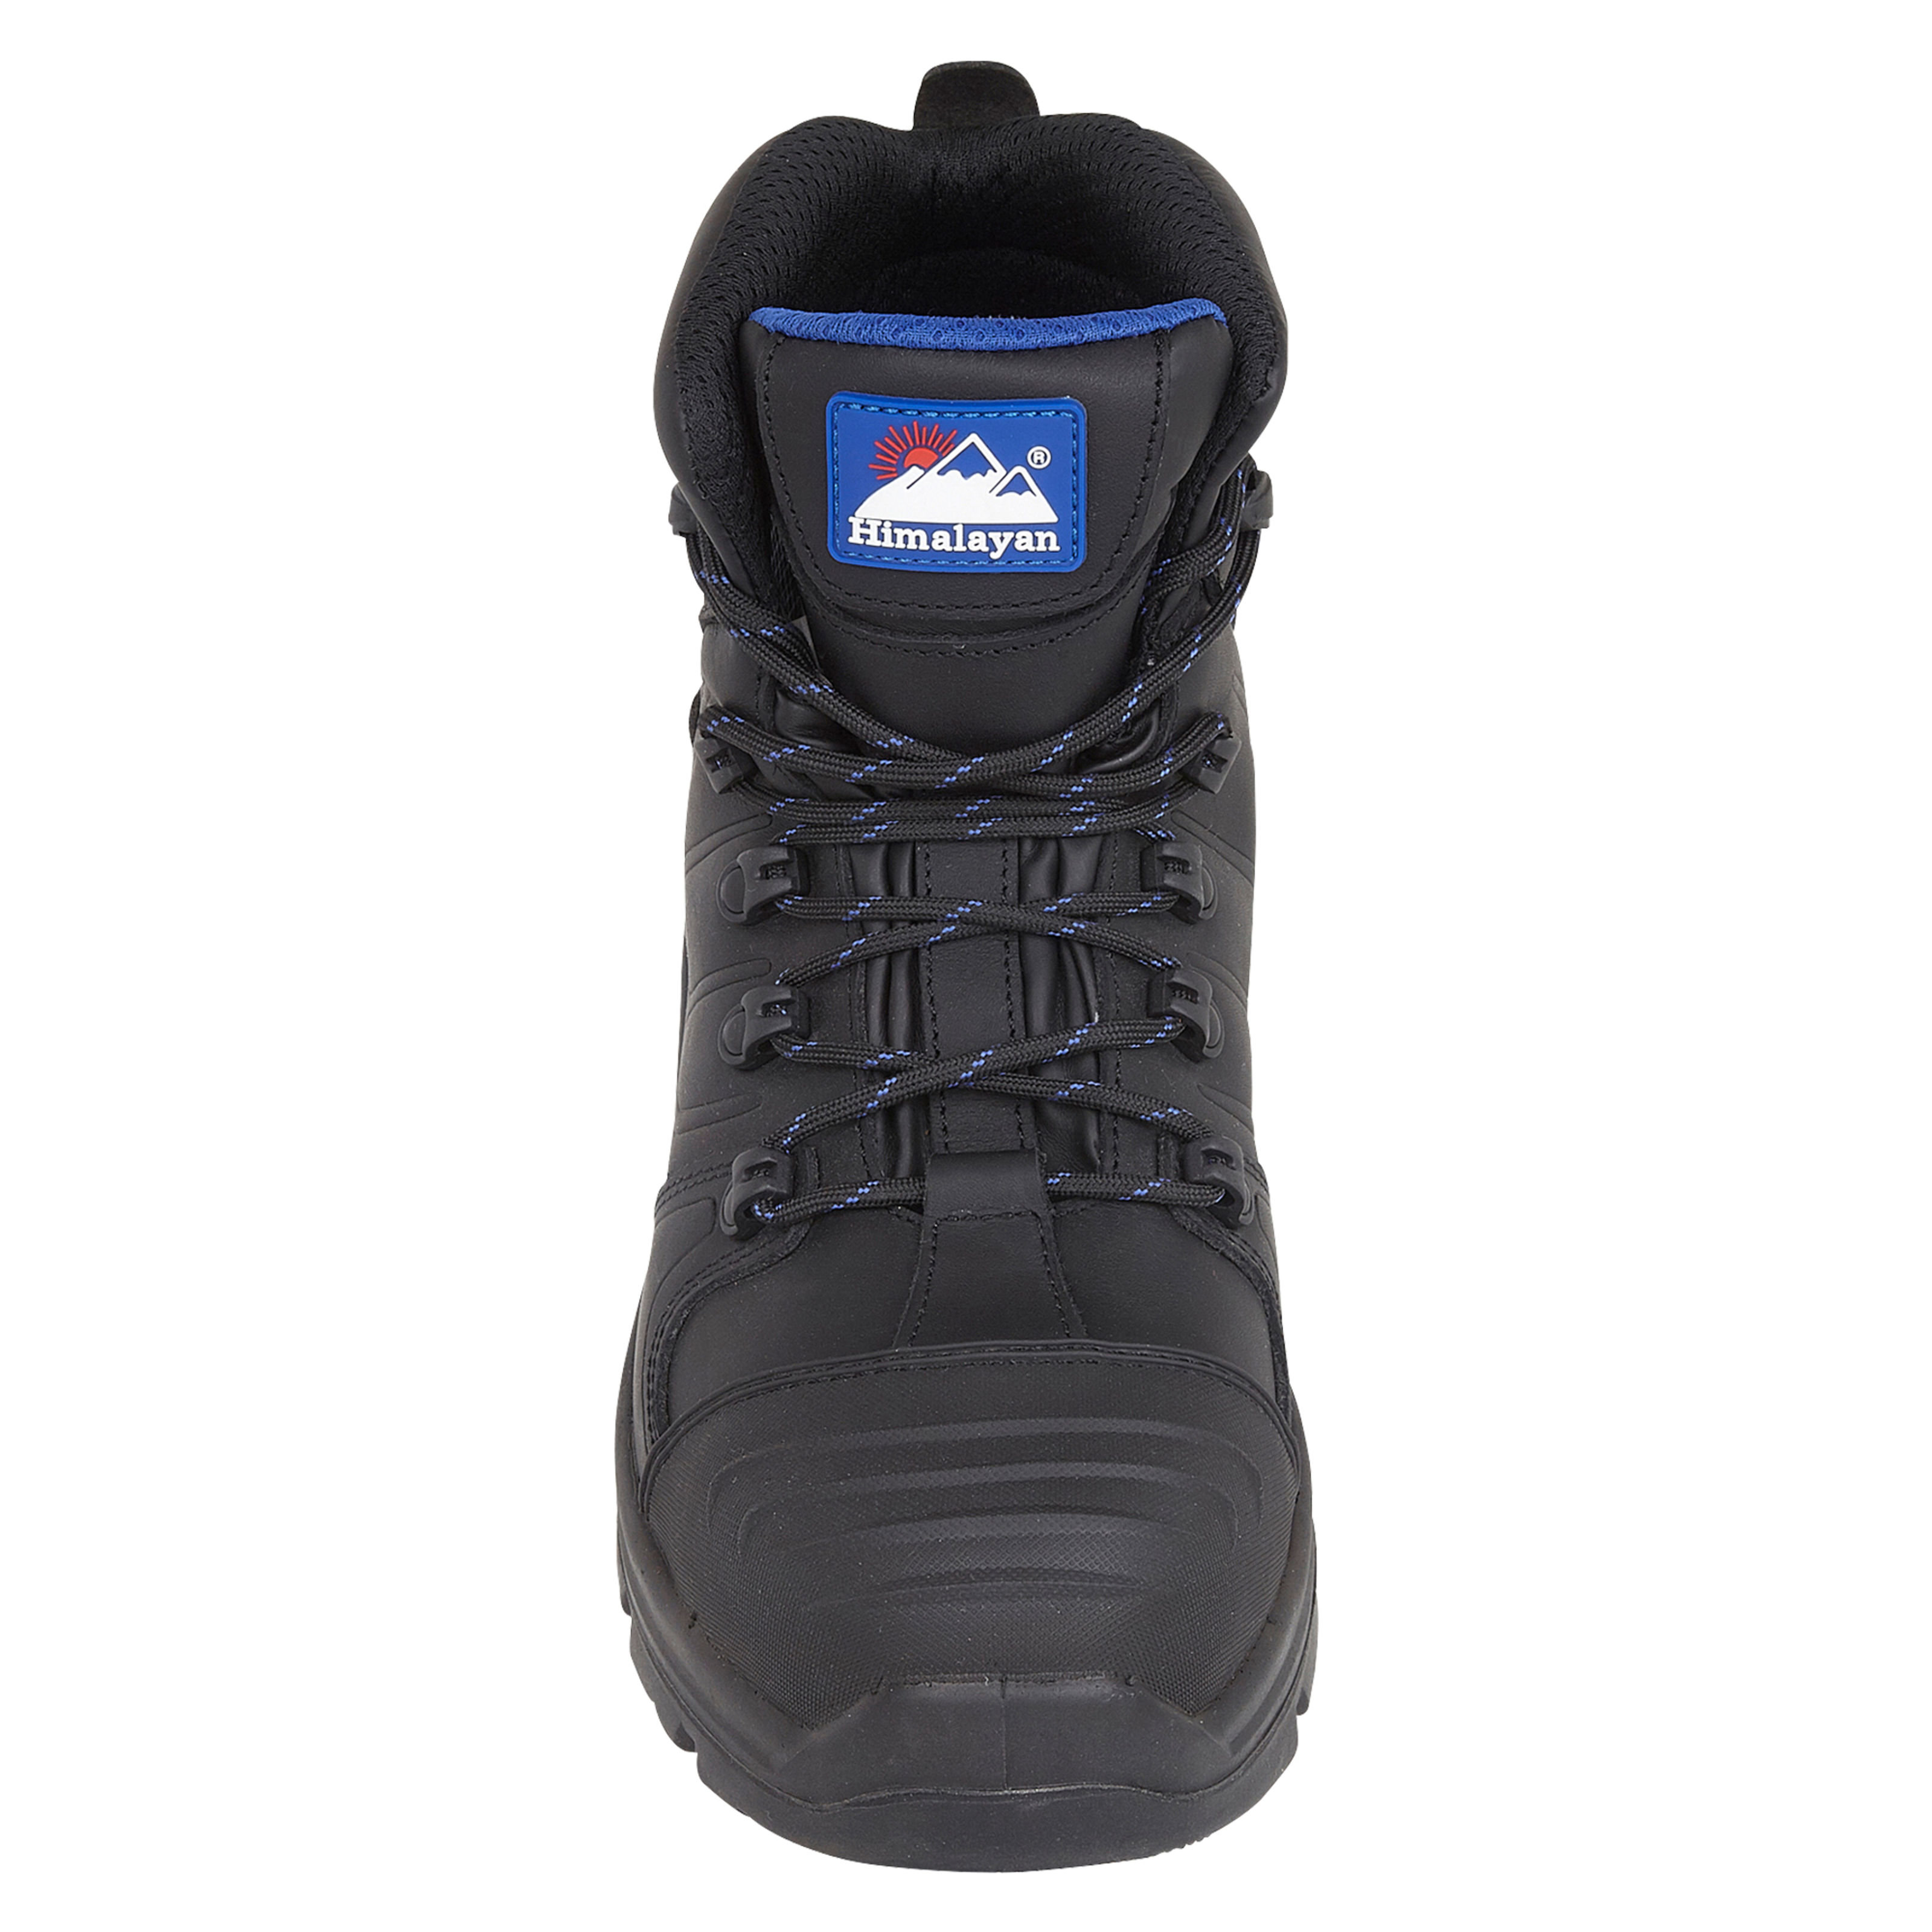 himalayan waterproof s3 safety boot